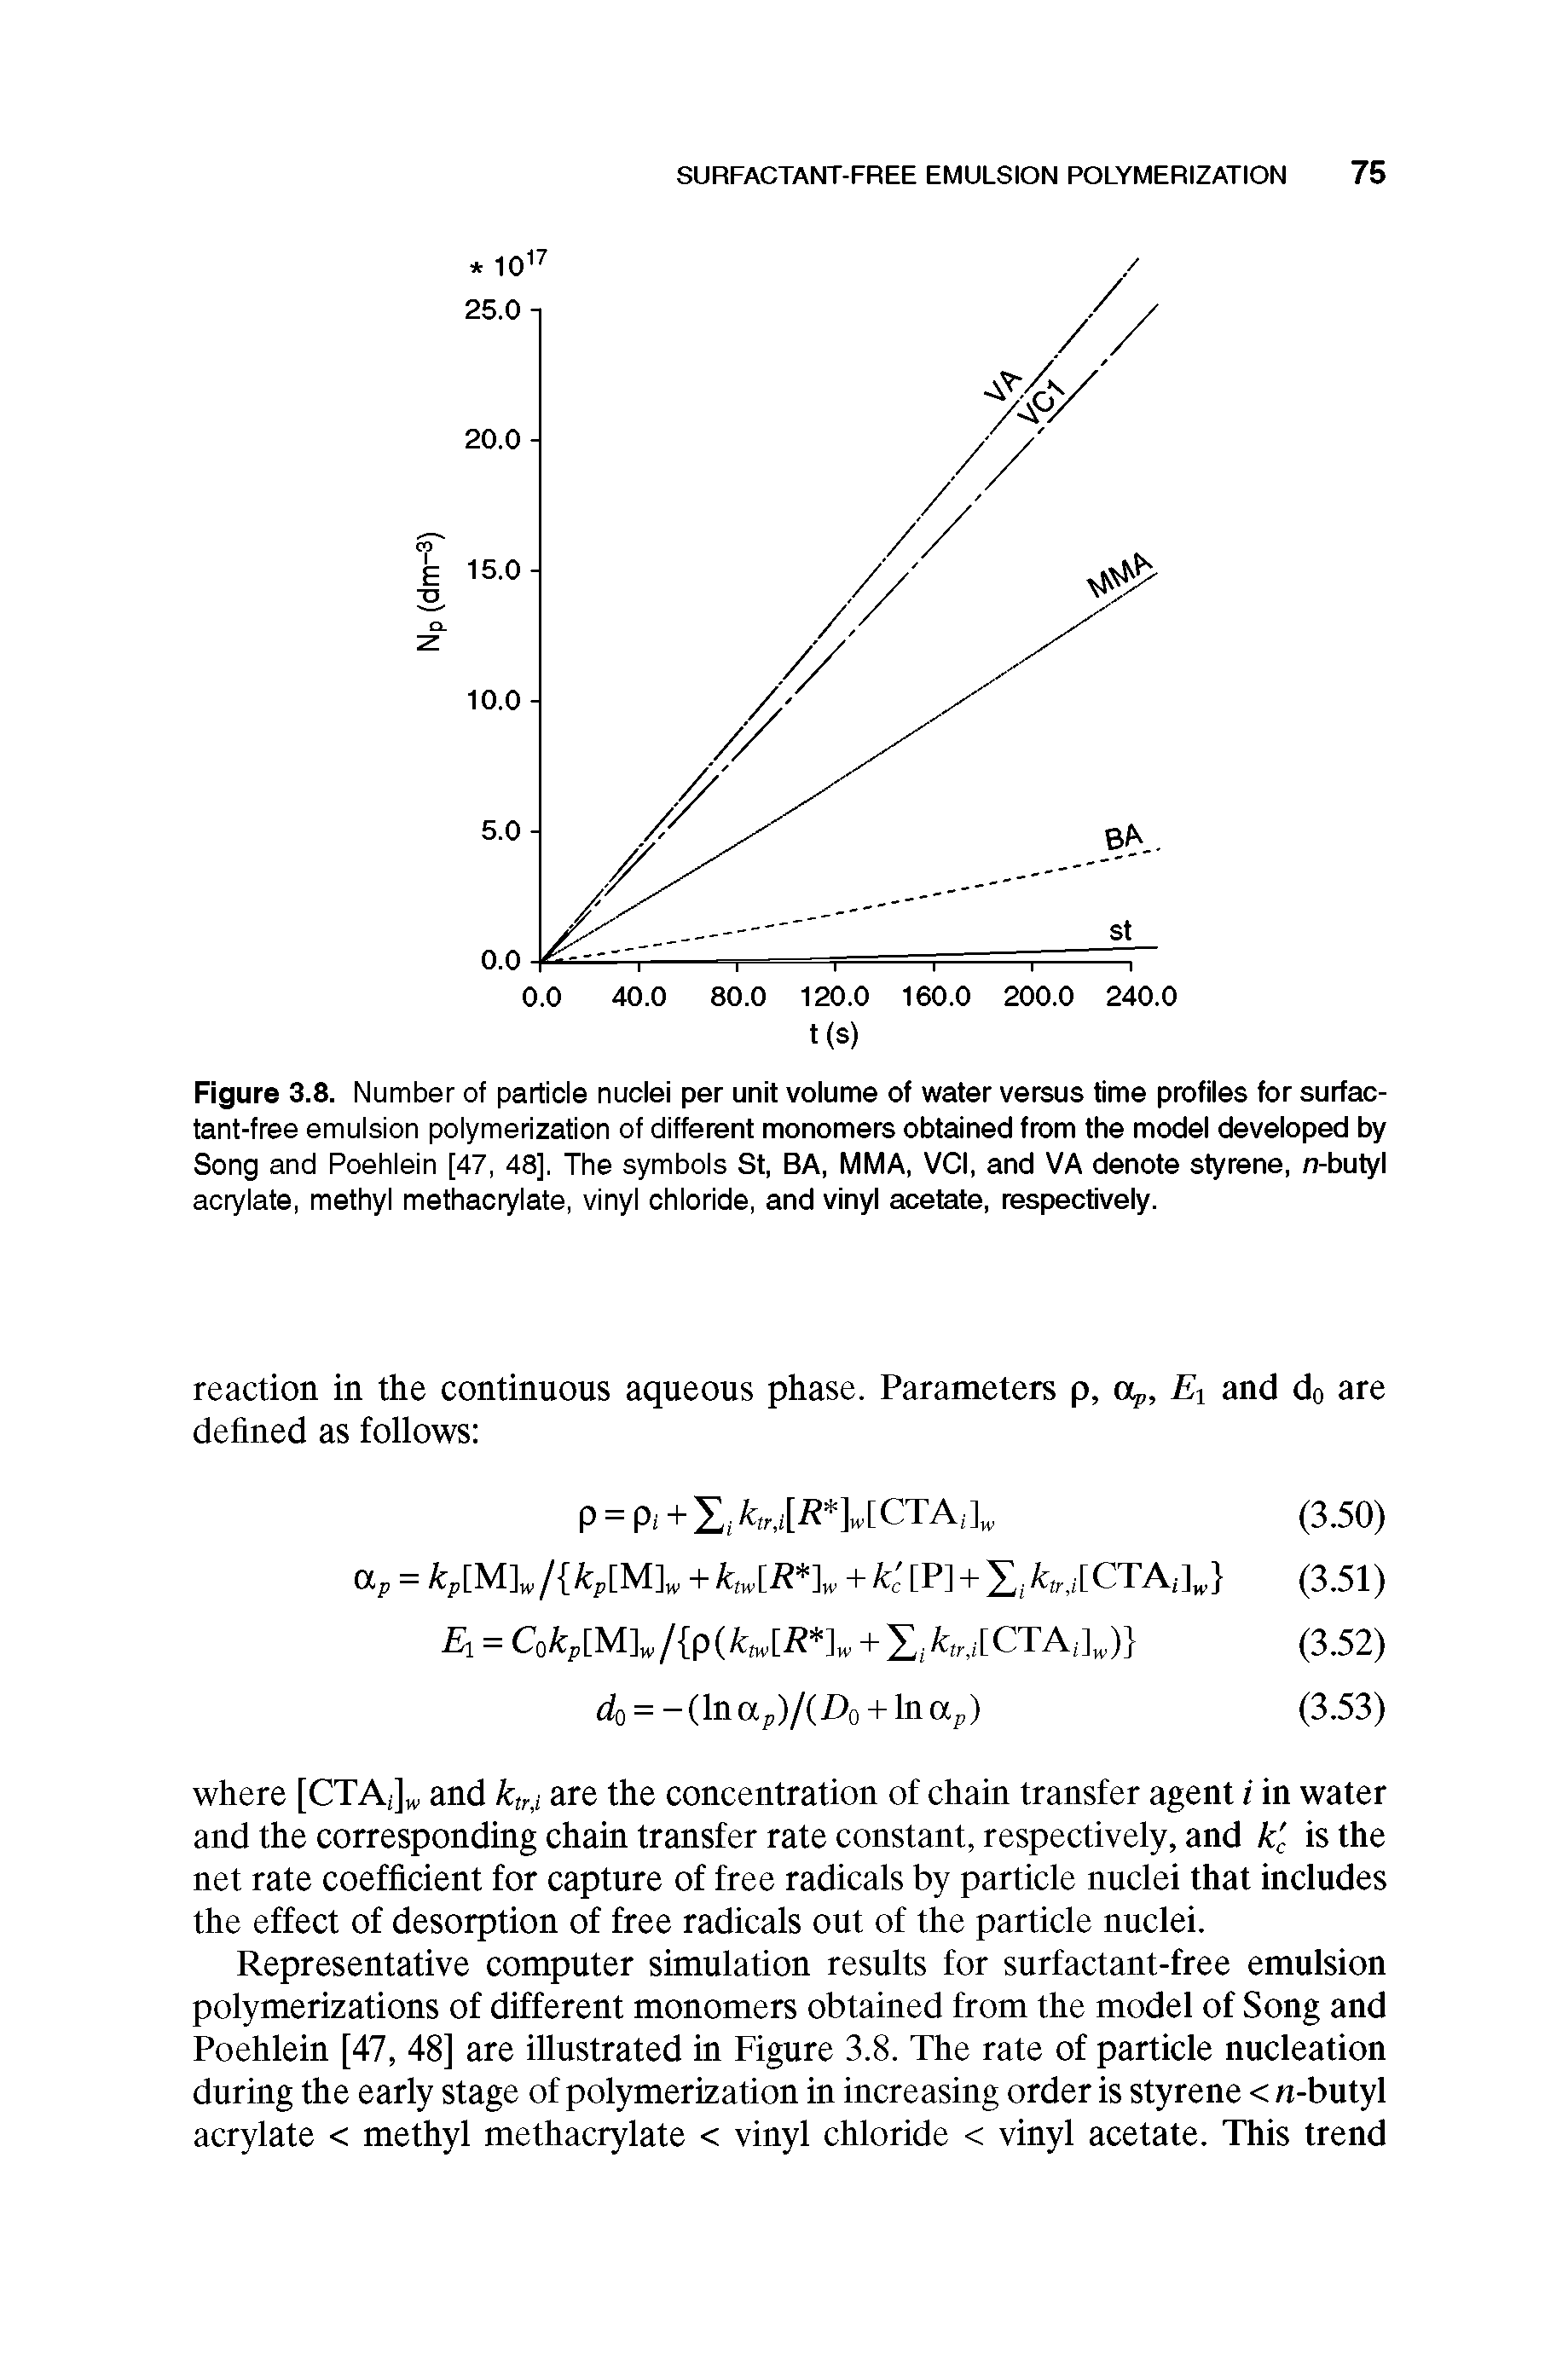 Figure 3.8. Number of particle nuclei per unit volume of water versus time profiles for surfactant-free emulsion polymerization of different monomers obtained from the model developed by Song and Poehlein [47, 48], The symbols St, BA, MMA, VCI, and VA denote styrene, n-butyl acrylate, methyl methacrylate, vinyl chloride, and vinyl acetate, respectively.